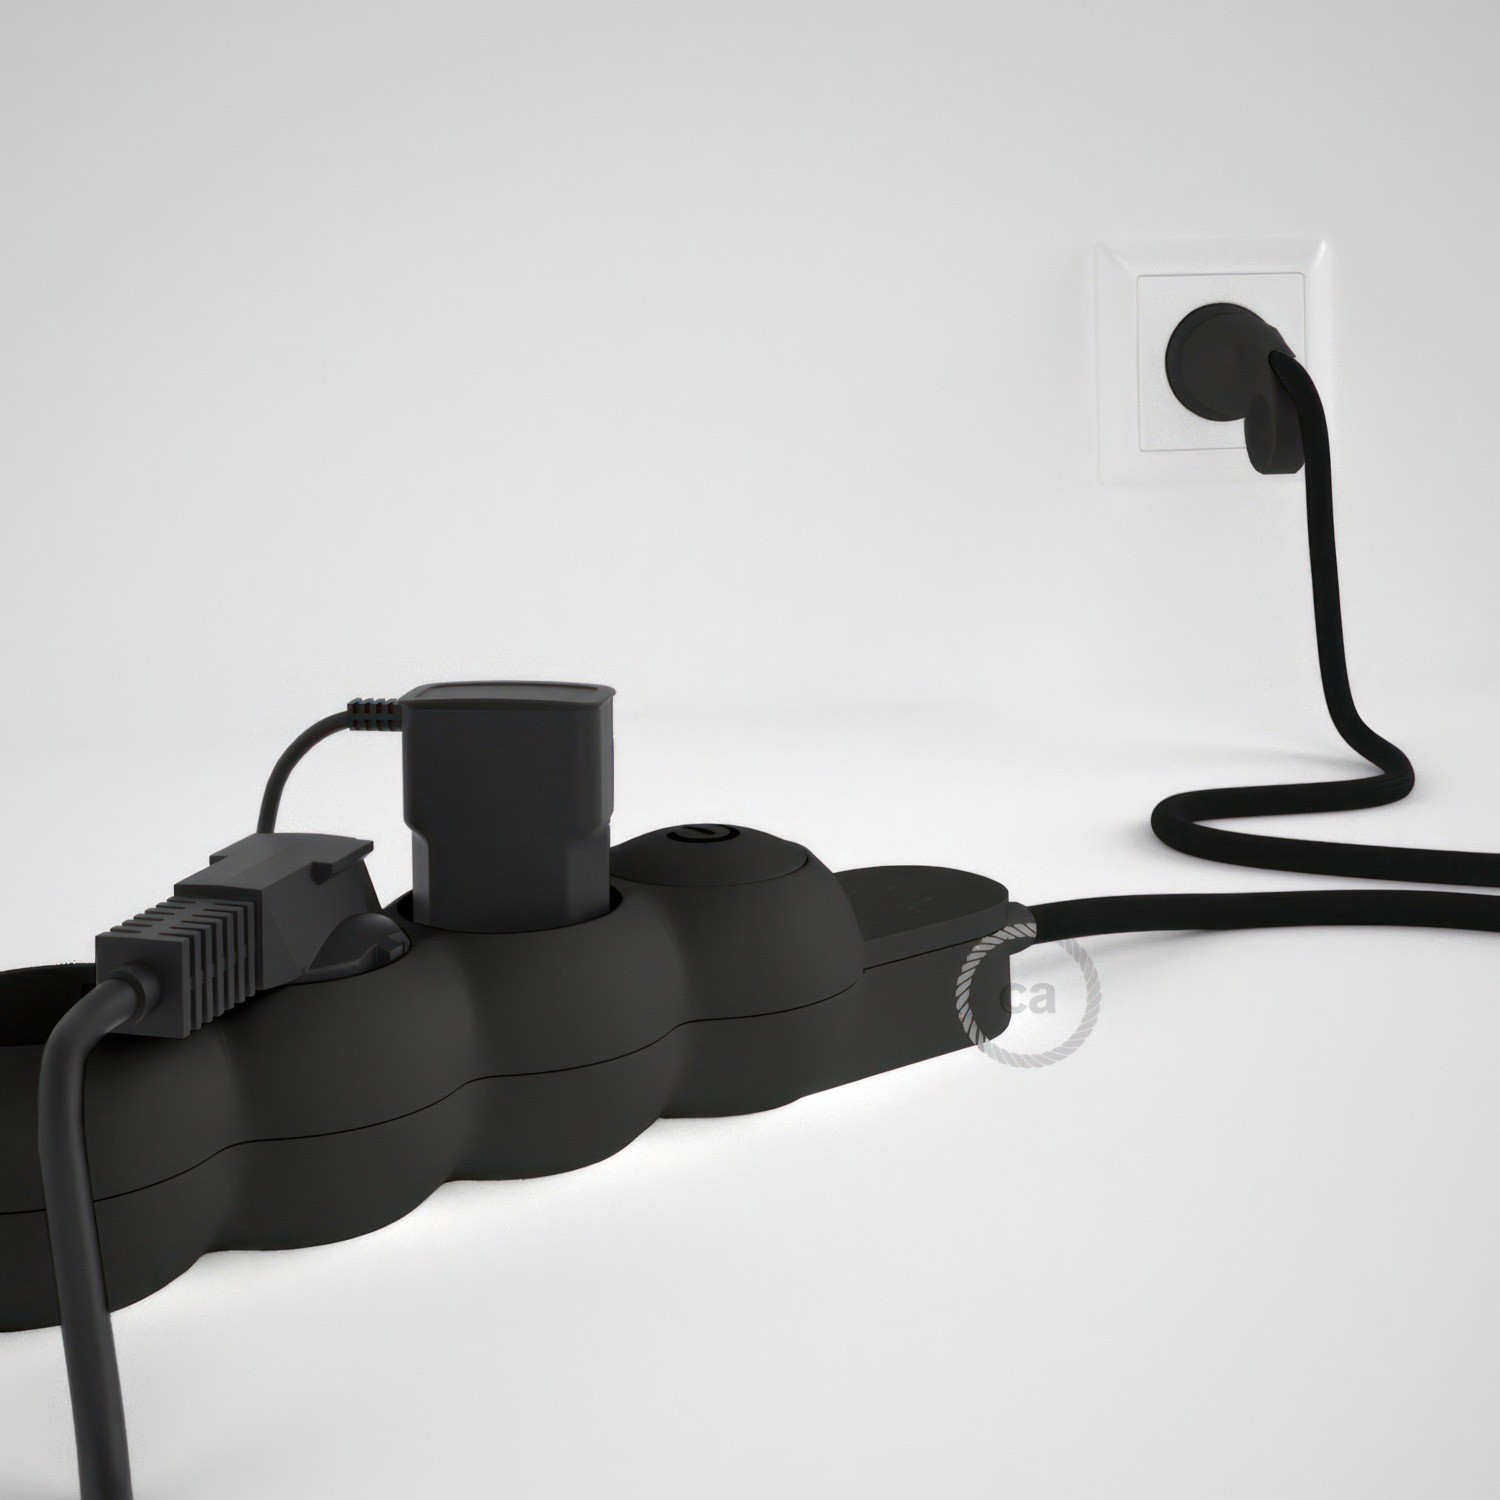 German power strip with electrical cable covered by rayon Black RM04 and Schuko plug with confort ring